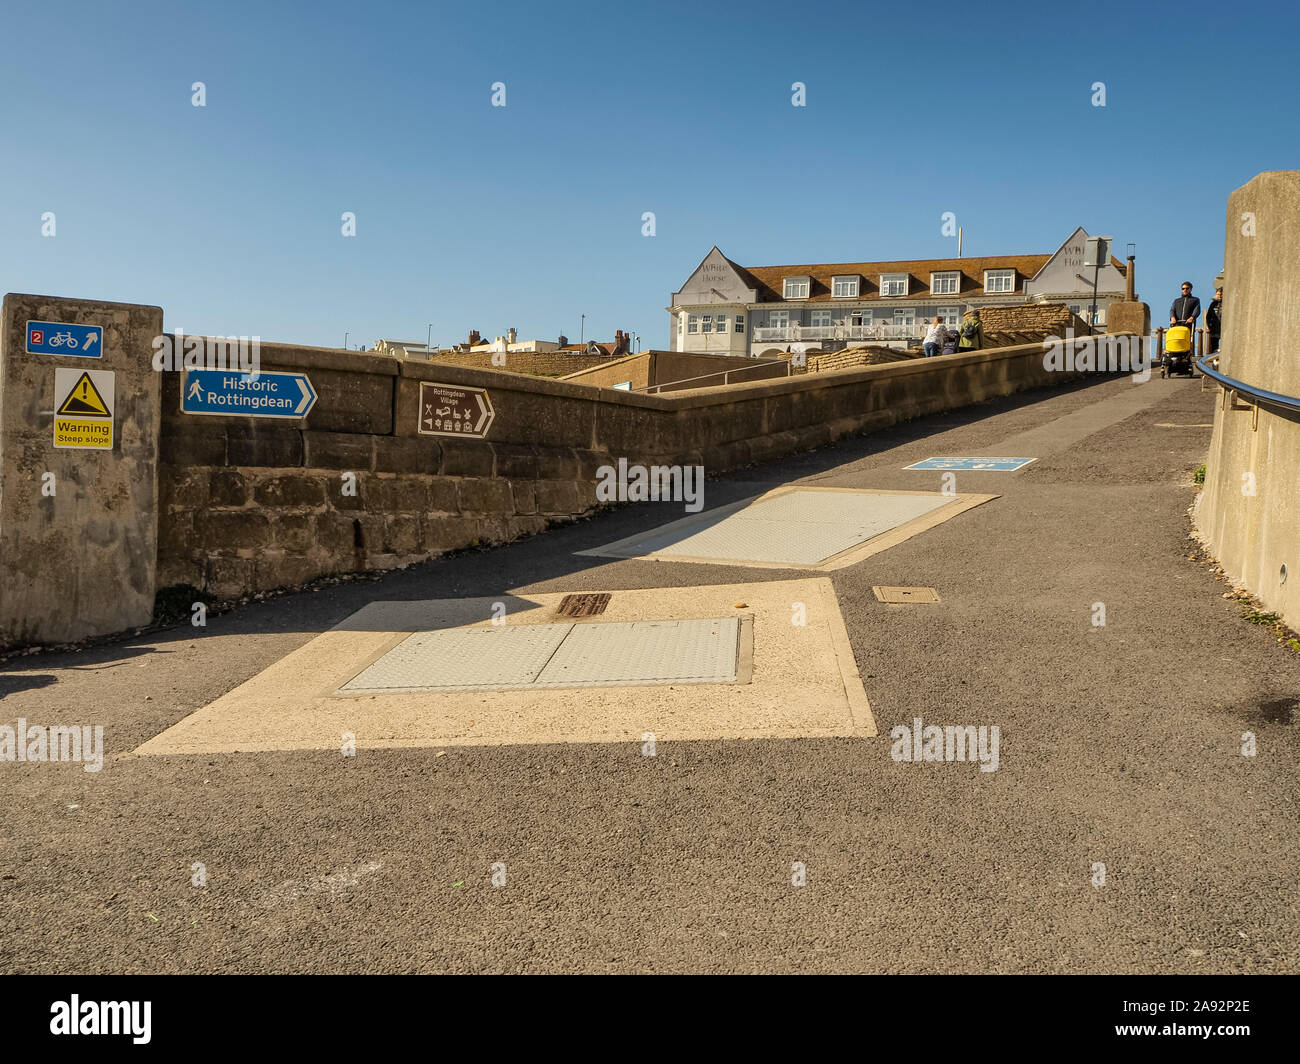 Signposts to Rottingdean Village seen from the beach promenade; Rottingdean, East Sussex, England Stock Photo